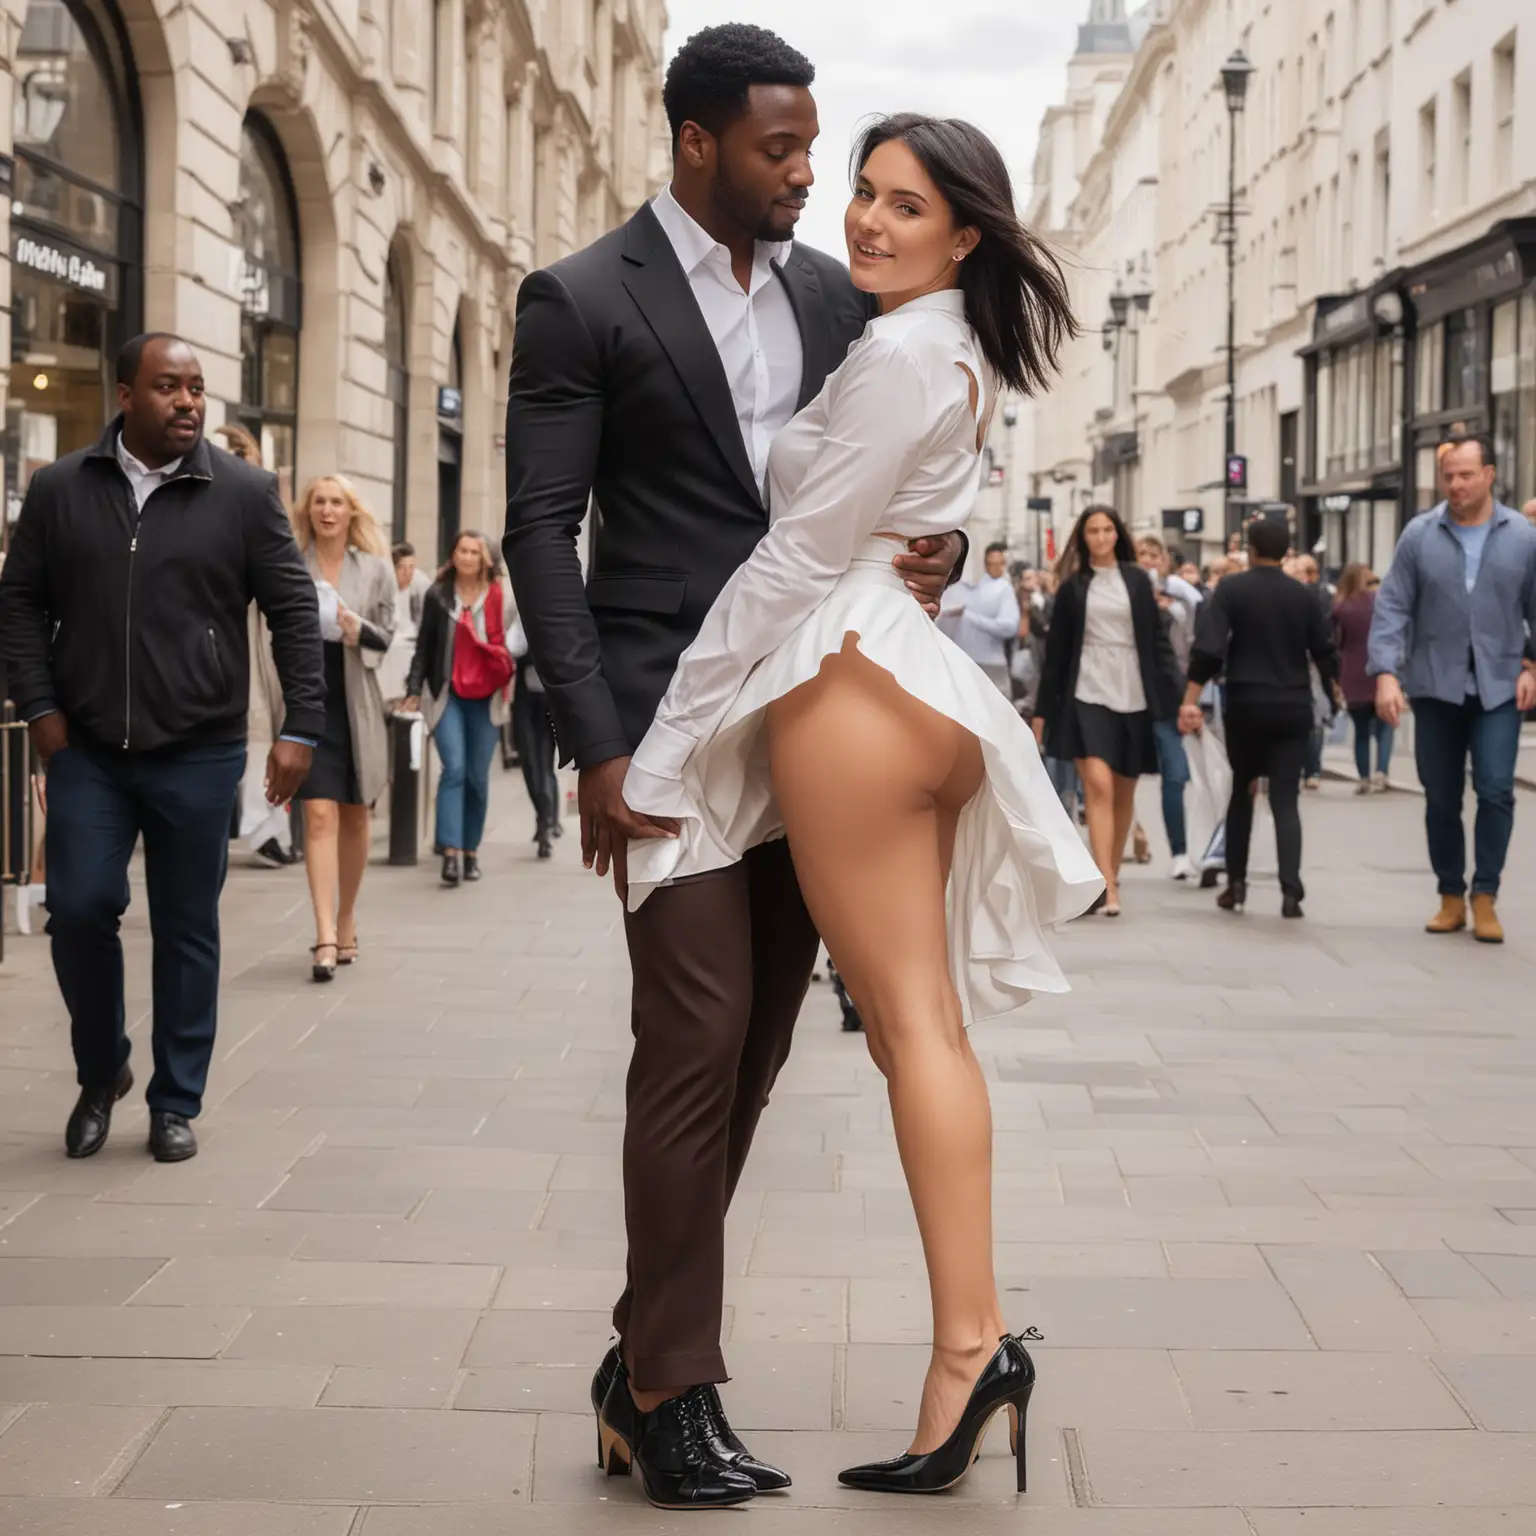 White woman, black hair, side shot, full body shot, wearing micro skirt high heels , curved back, busty body, hugged by a black men, oxford street
Lifted skirt by wind, looking at viewer